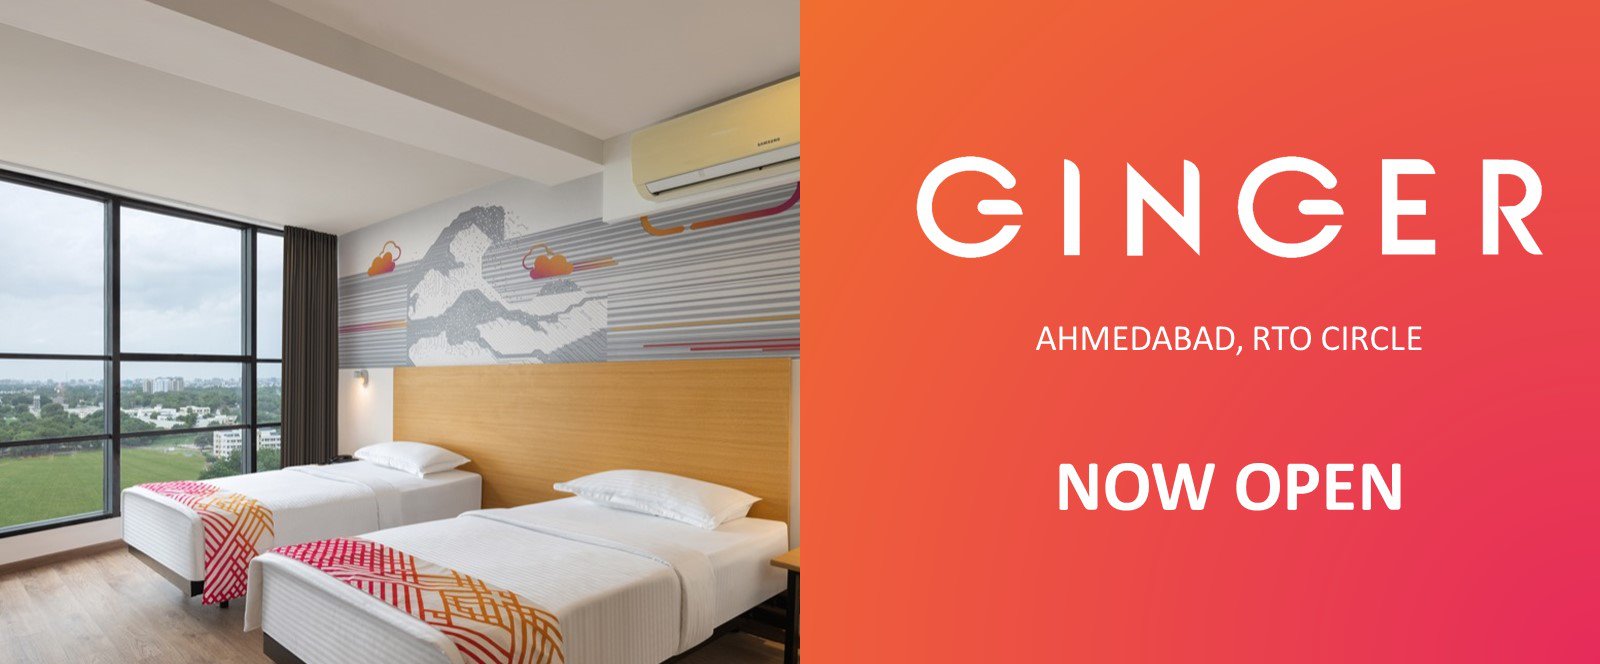 Ginger Ahmedabad Now Open